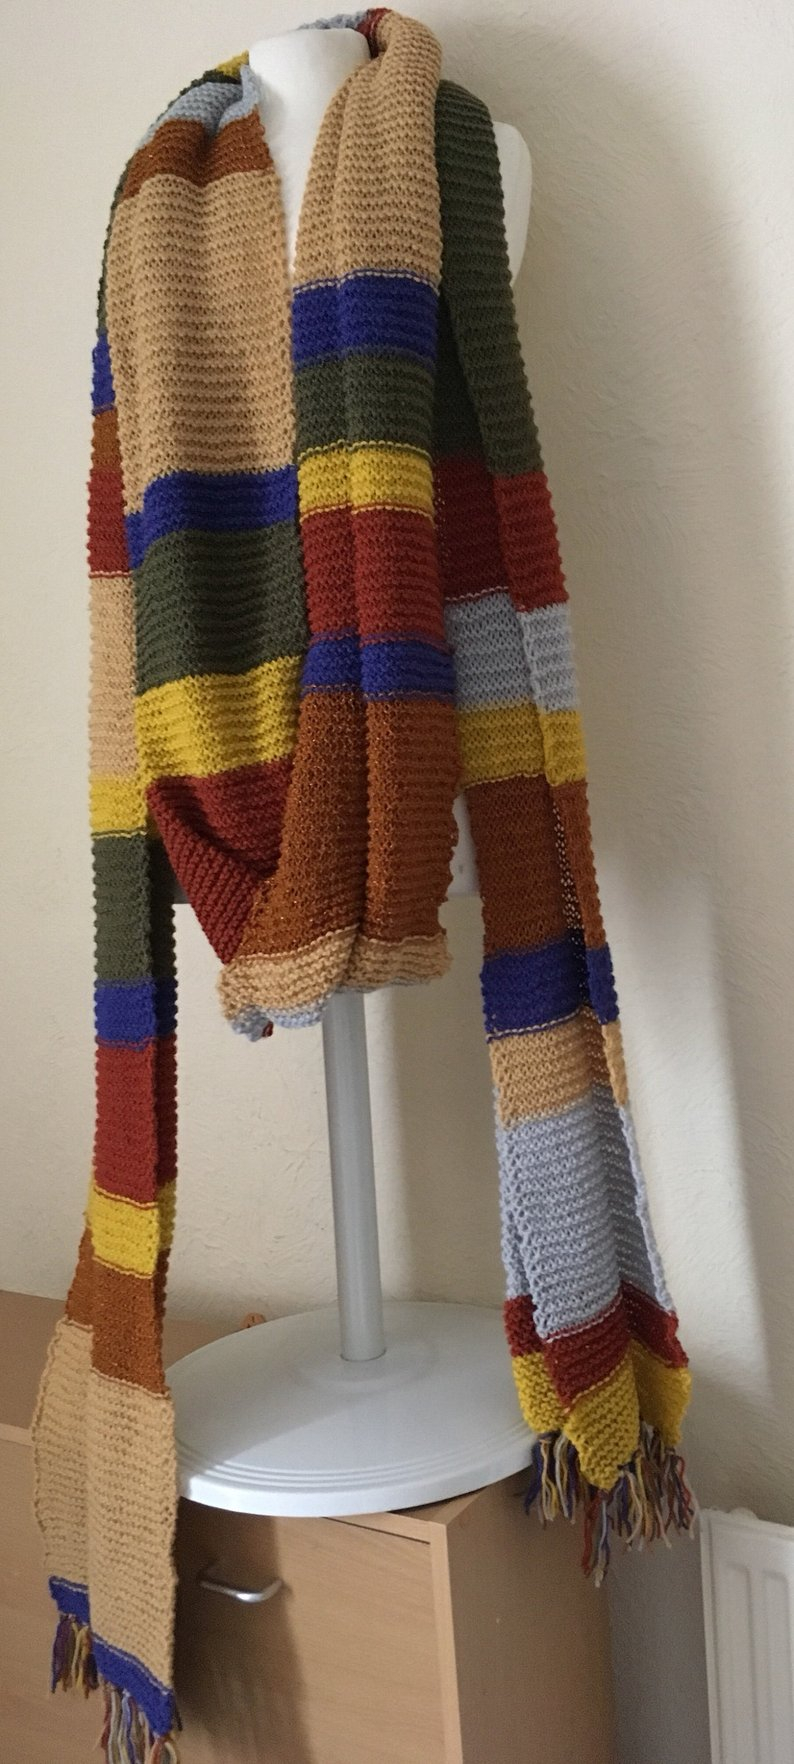 Dr Who Scarf Pattern Crochet Doctor Who Scarf 4th Doctor Tom Baker Made From Official Bbc Etsy